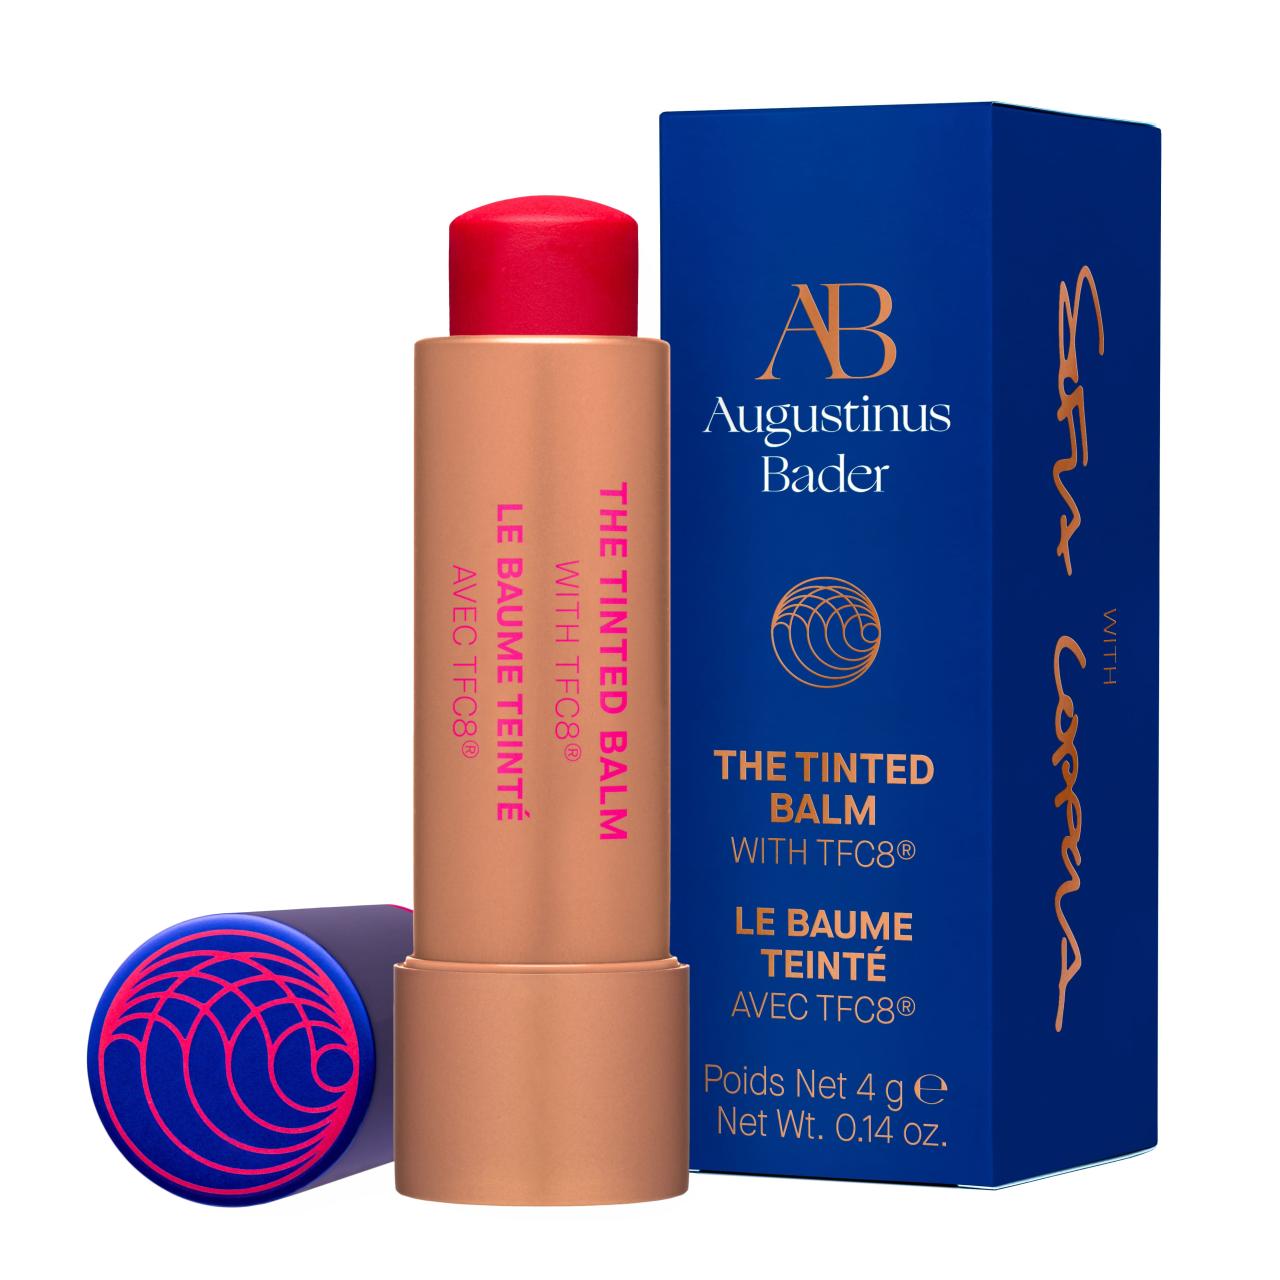 The Tinted Balm